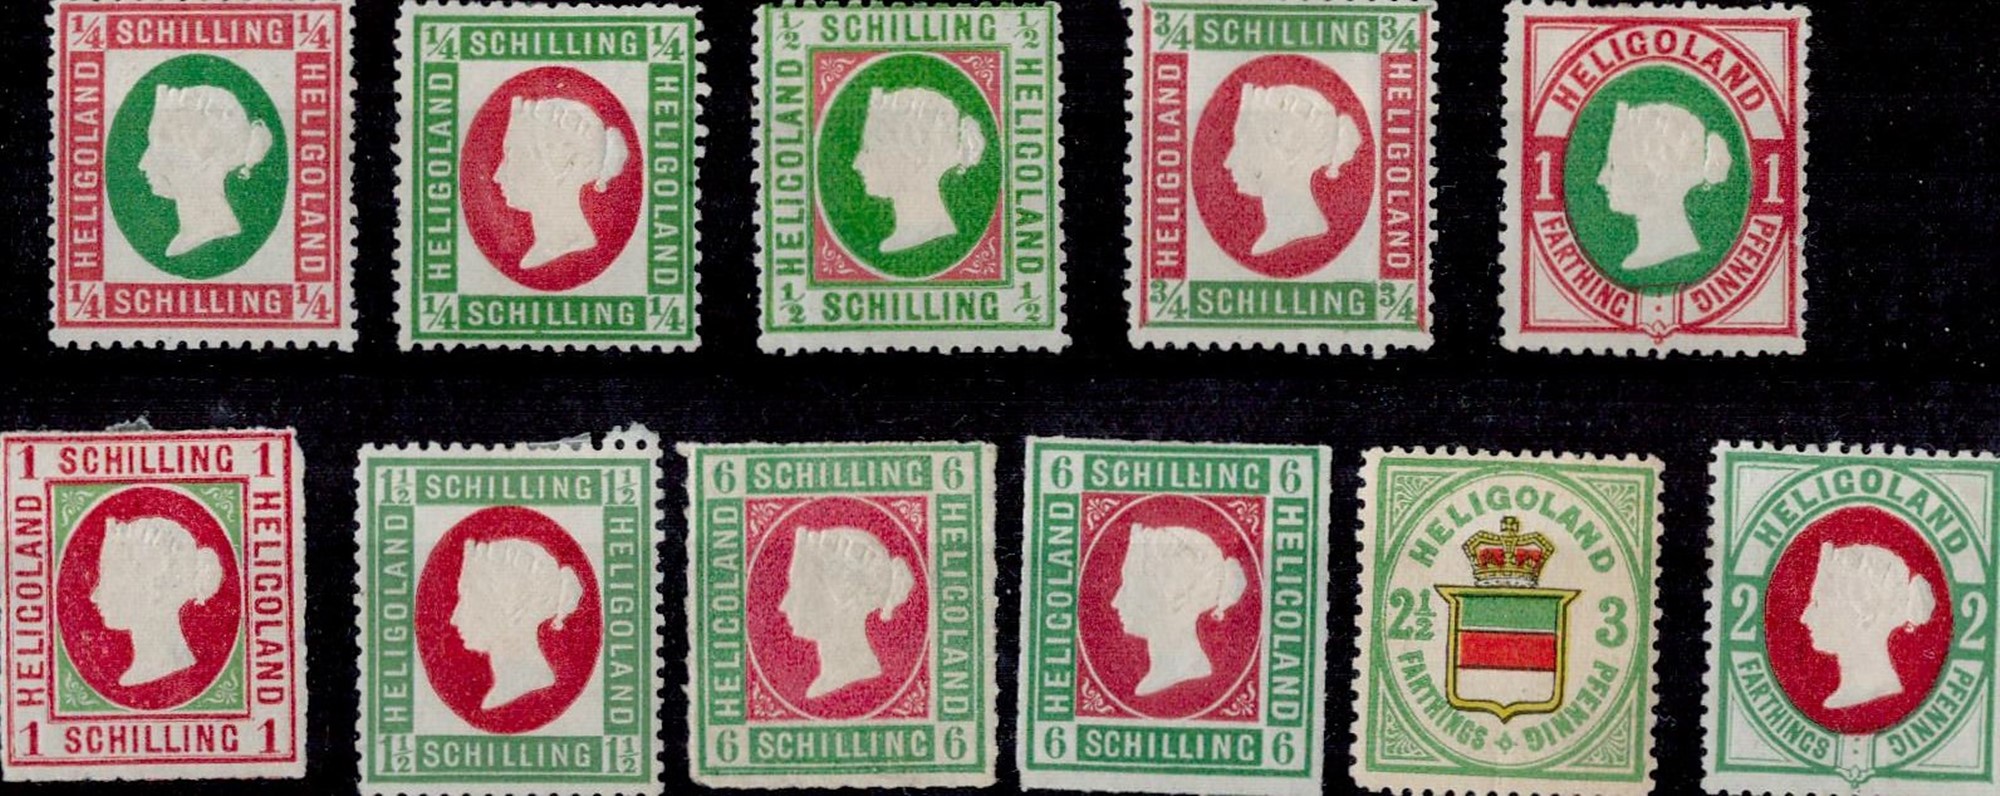 Heligoland 11 Stamps Mint, high catalogue value may include reprints, nice selection. Good